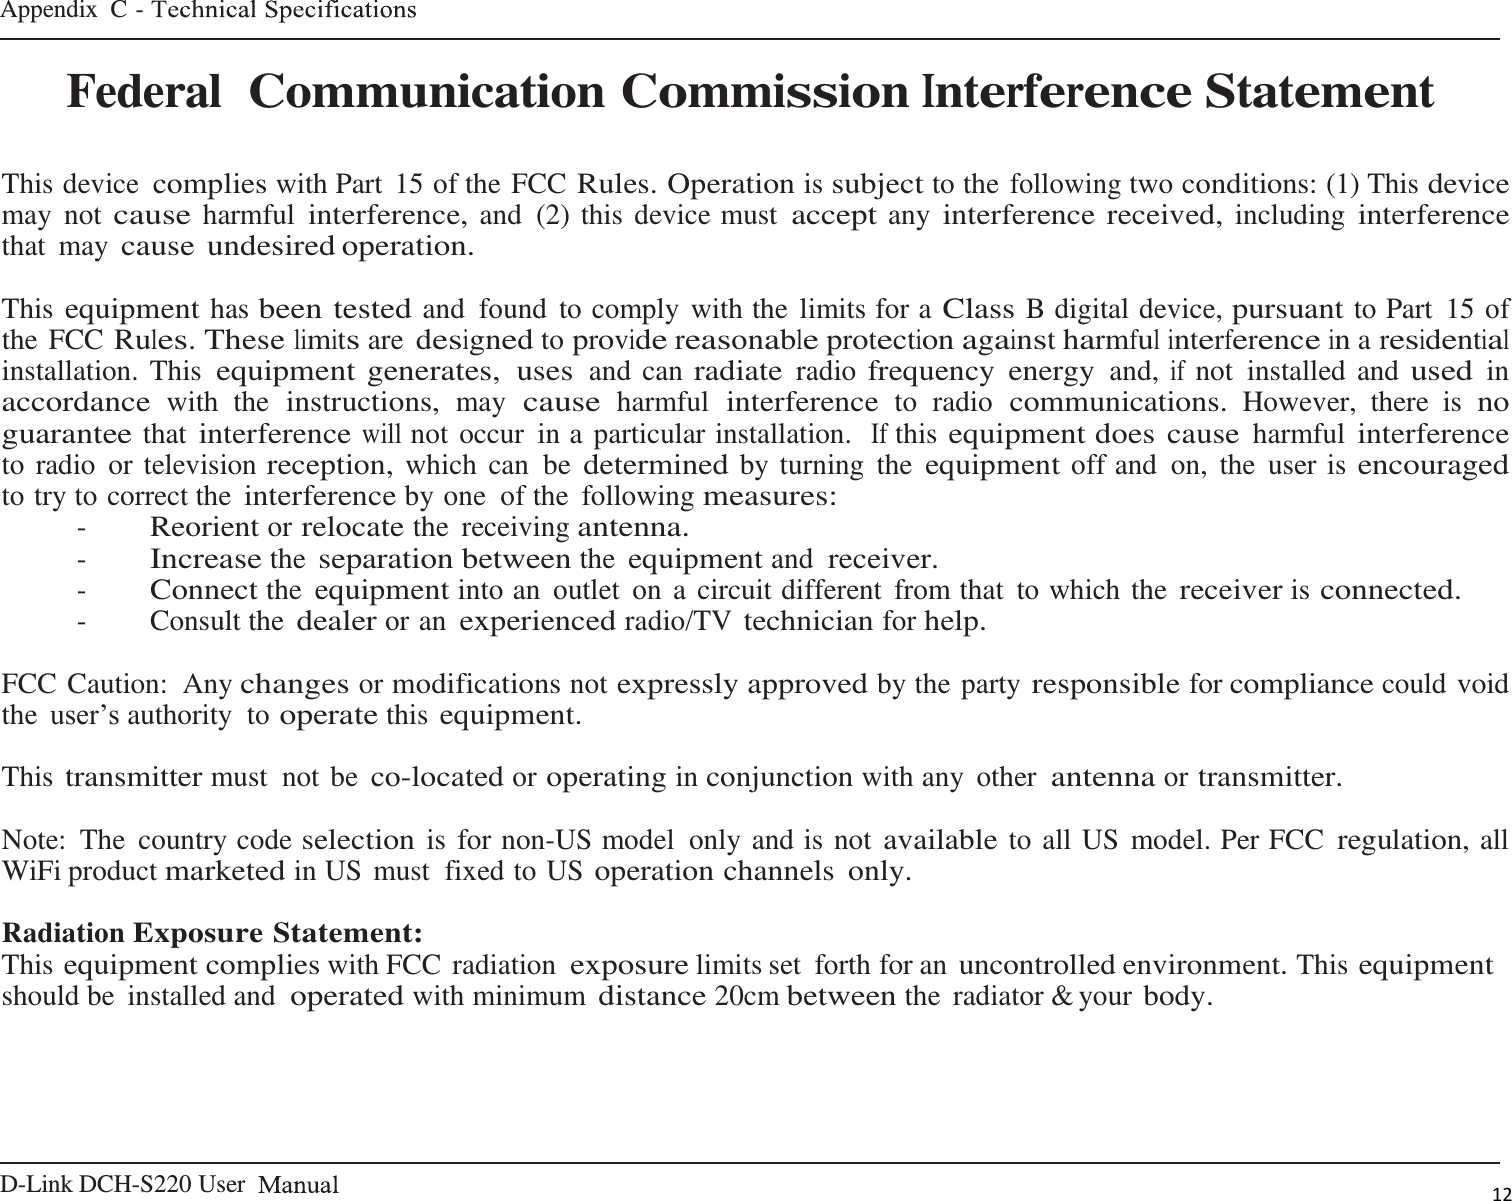 D-Link DCH-S220 User   Appendix  C -    12   Federal Communication Commission Interference Statement   This device complies with Part  15 of the FCC Rules. Operation is subject to the following two conditions: (1) This device may  not cause harmful interference, and  (2) this device must accept any interference received, including interference that  may cause undesired operation.  This equipment has been tested and  found  to comply with the limits for a Class B digital device, pursuant to Part  15 of the FCC Rules. These limits are designed to provide reasonable protection against harmful interference in a residential installation. This equipment generates,  uses and can radiate radio frequency  energy and, if not  installed and used in accordance with  the instructions, may cause harmful interference to  radio communications. However,  there  is no guarantee that interference will not occur  in a particular installation.  If this equipment does cause harmful interference to radio  or television reception, which  can  be determined by turning  the equipment off and  on,  the  user is encouraged to try to correct the interference by one of the  following measures: - Reorient or relocate the  receiving antenna. - Increase the separation between the equipment and receiver. - Connect the equipment into an  outlet  on a circuit different  from that  to which the receiver is connected. -  Consult the dealer or an experienced radio/TV technician for help.  FCC Caution:  Any changes or modifications not expressly approved by the party responsible for compliance could void the user’s authority  to operate this equipment.  This transmitter must  not be co-located or operating in conjunction with any  other antenna or transmitter.  Note:  The  country code selection is for non-US model  only and is not available to all US model. Per FCC regulation, all WiFi product marketed in US must  fixed to US operation channels  only.  Radiation Exposure Statement: This equipment complies with FCC radiation exposure limits set  forth for an uncontrolled environment. This equipment should be  installed and operated with minimum distance 20cm between the  radiator &amp; your body. 